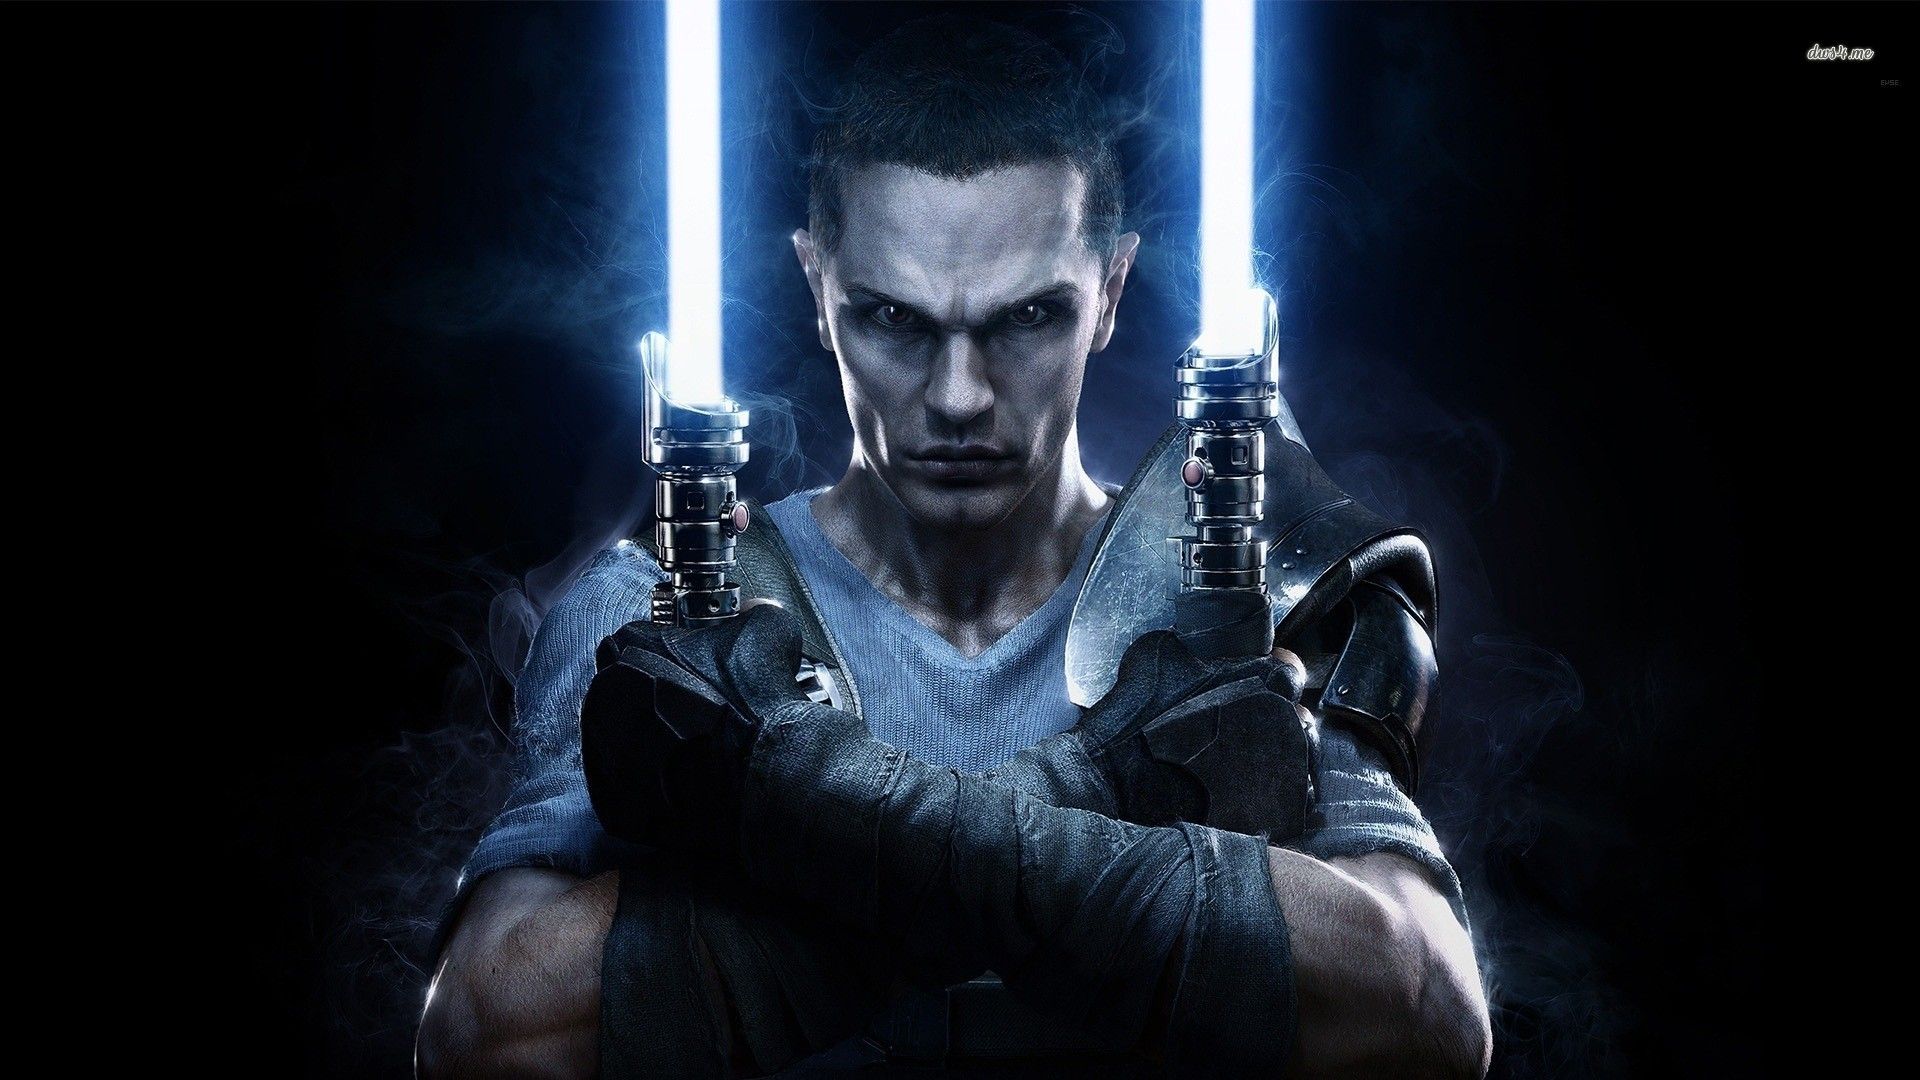 Star Wars - The Force Unleashed II wallpaper - Game wallpapers ...